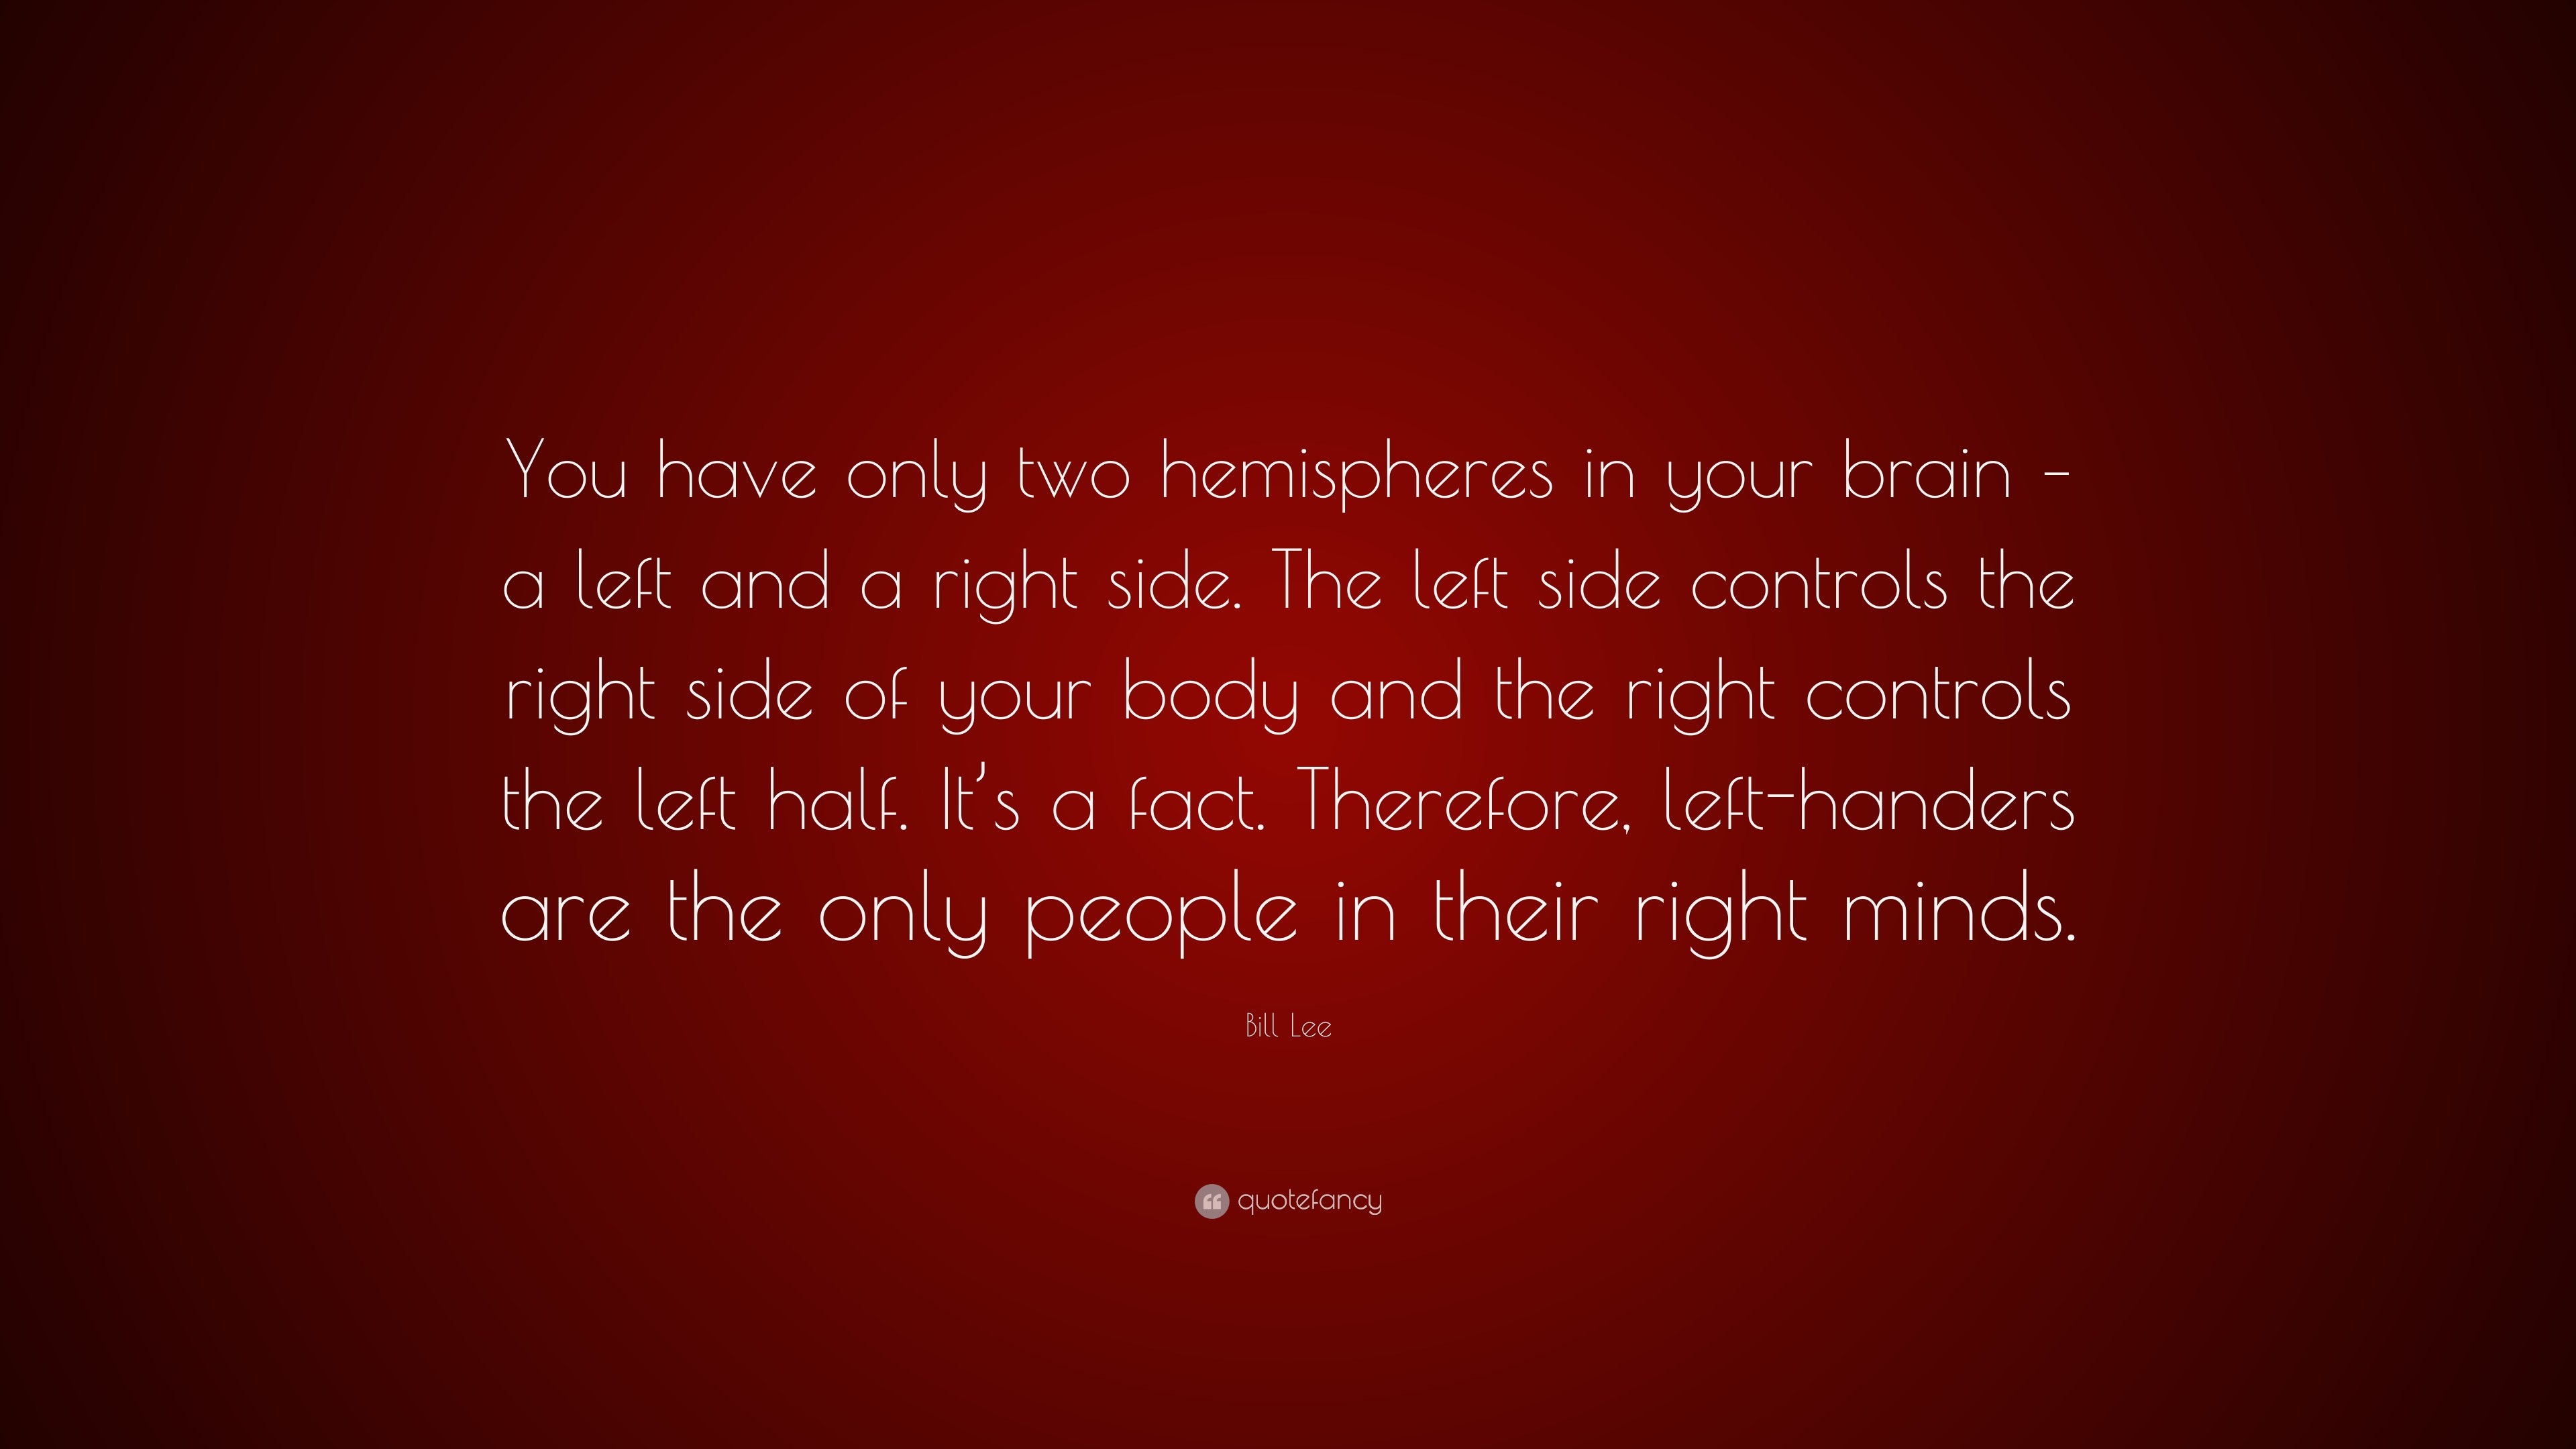 3840x2160 Bill Lee Quote: “You have only two hemispheres in your brain – a left